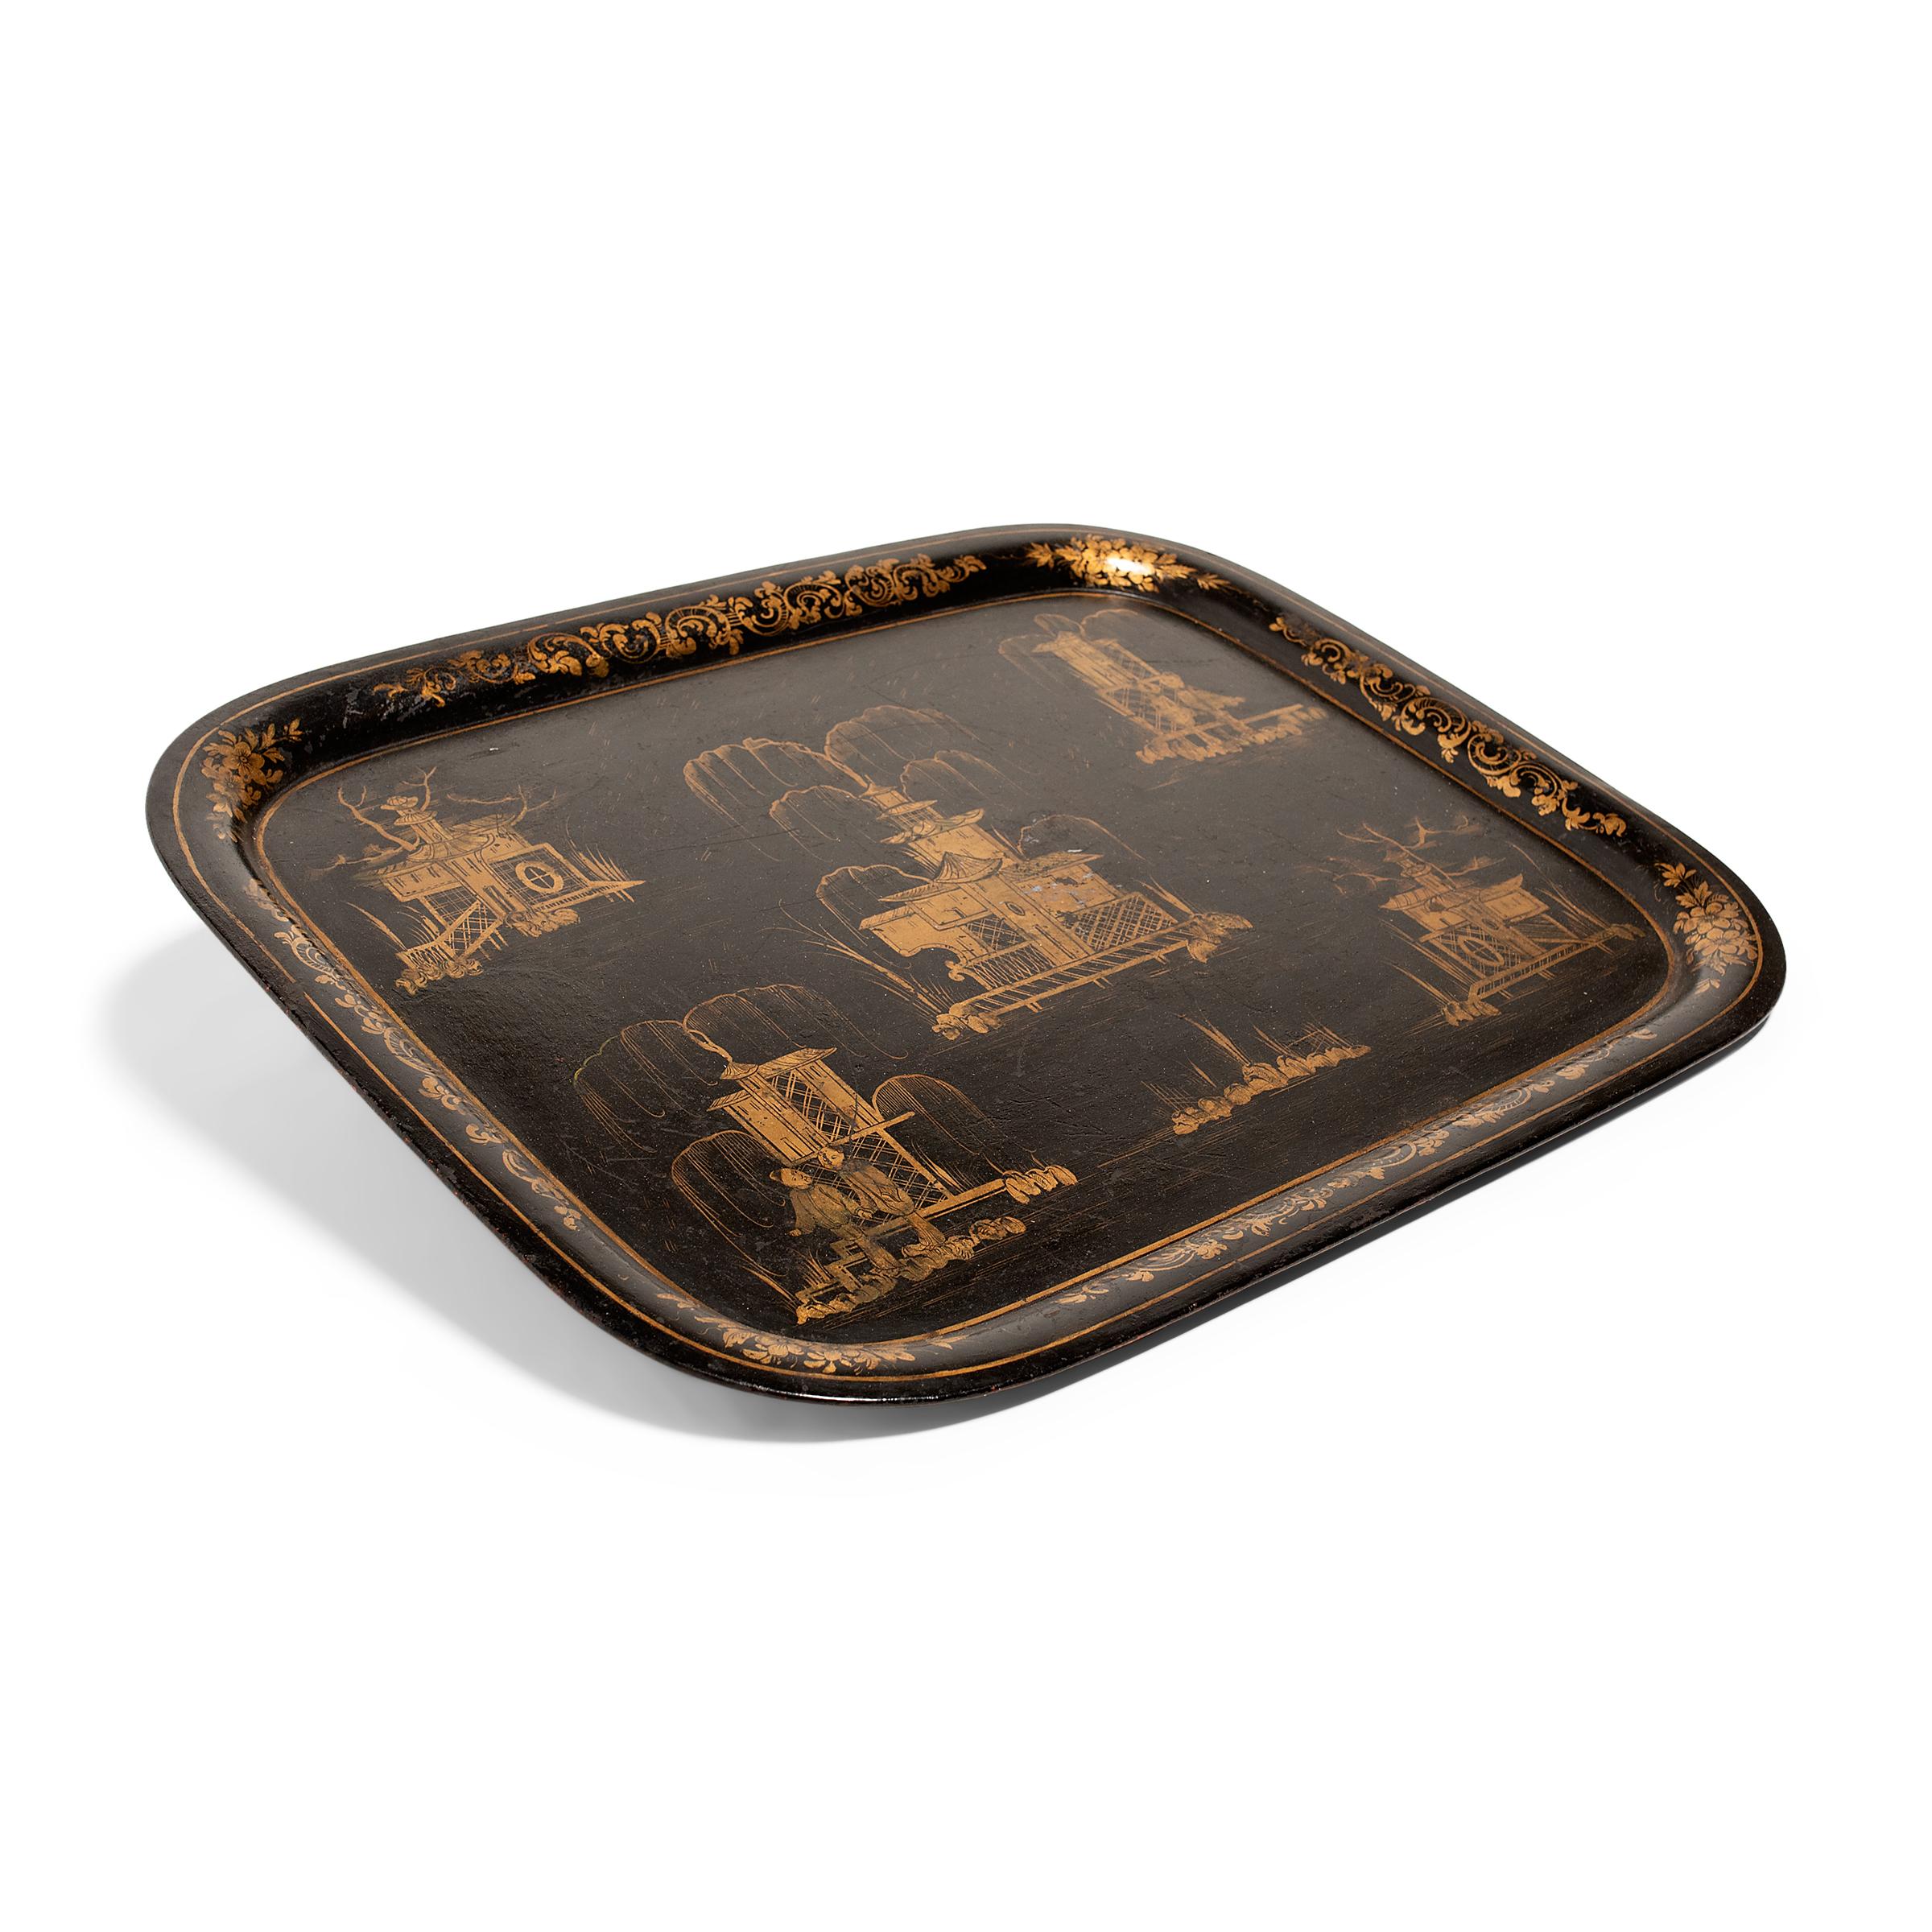 This large metal tray dates to the early 20th century and is decorated with a gold-and-black design in the Chinoiserie style. A black lacquer finish cloaks the rectangular tray on both sides and offers the perfect canvas for a gilt garden landscape.